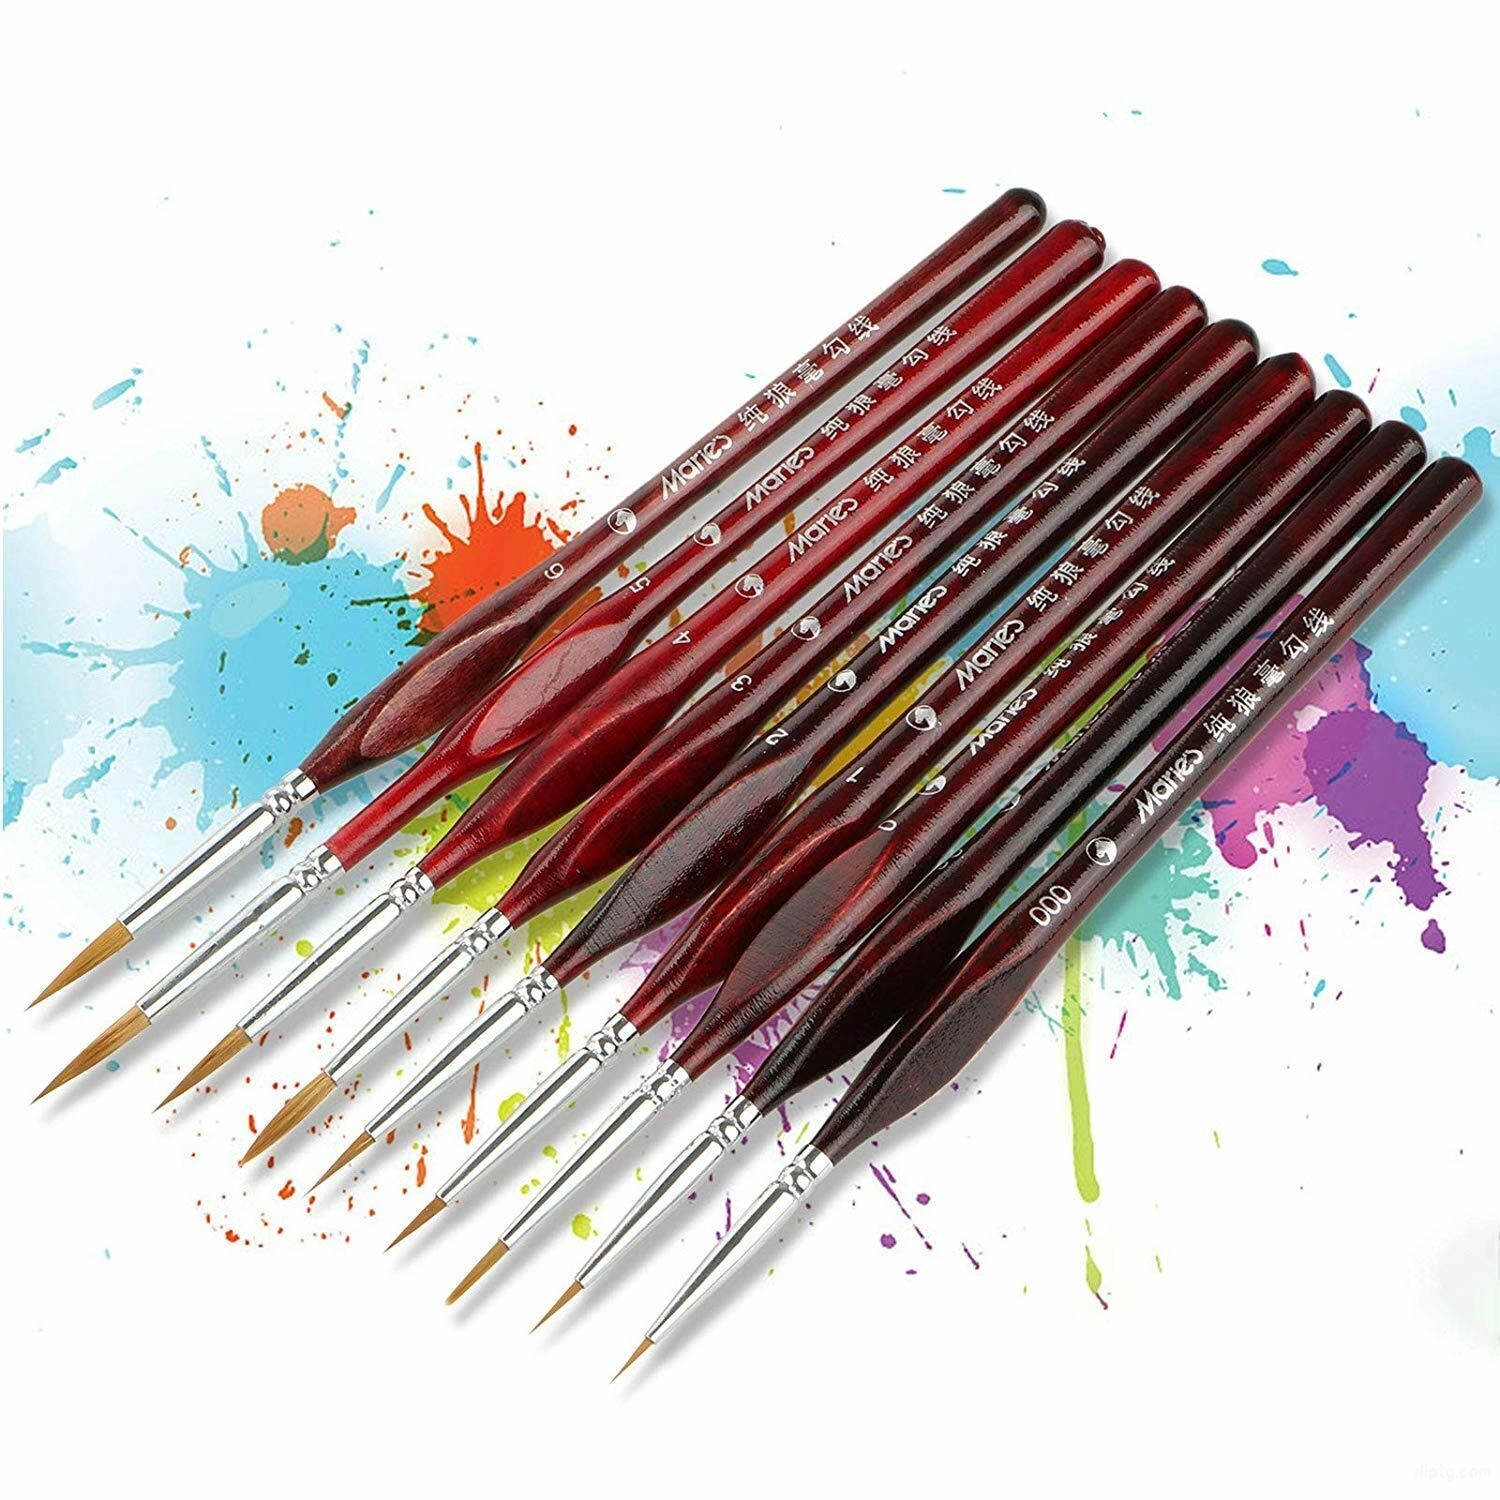 Detail Paint Brushes Painting By Numbers Kits.jpg